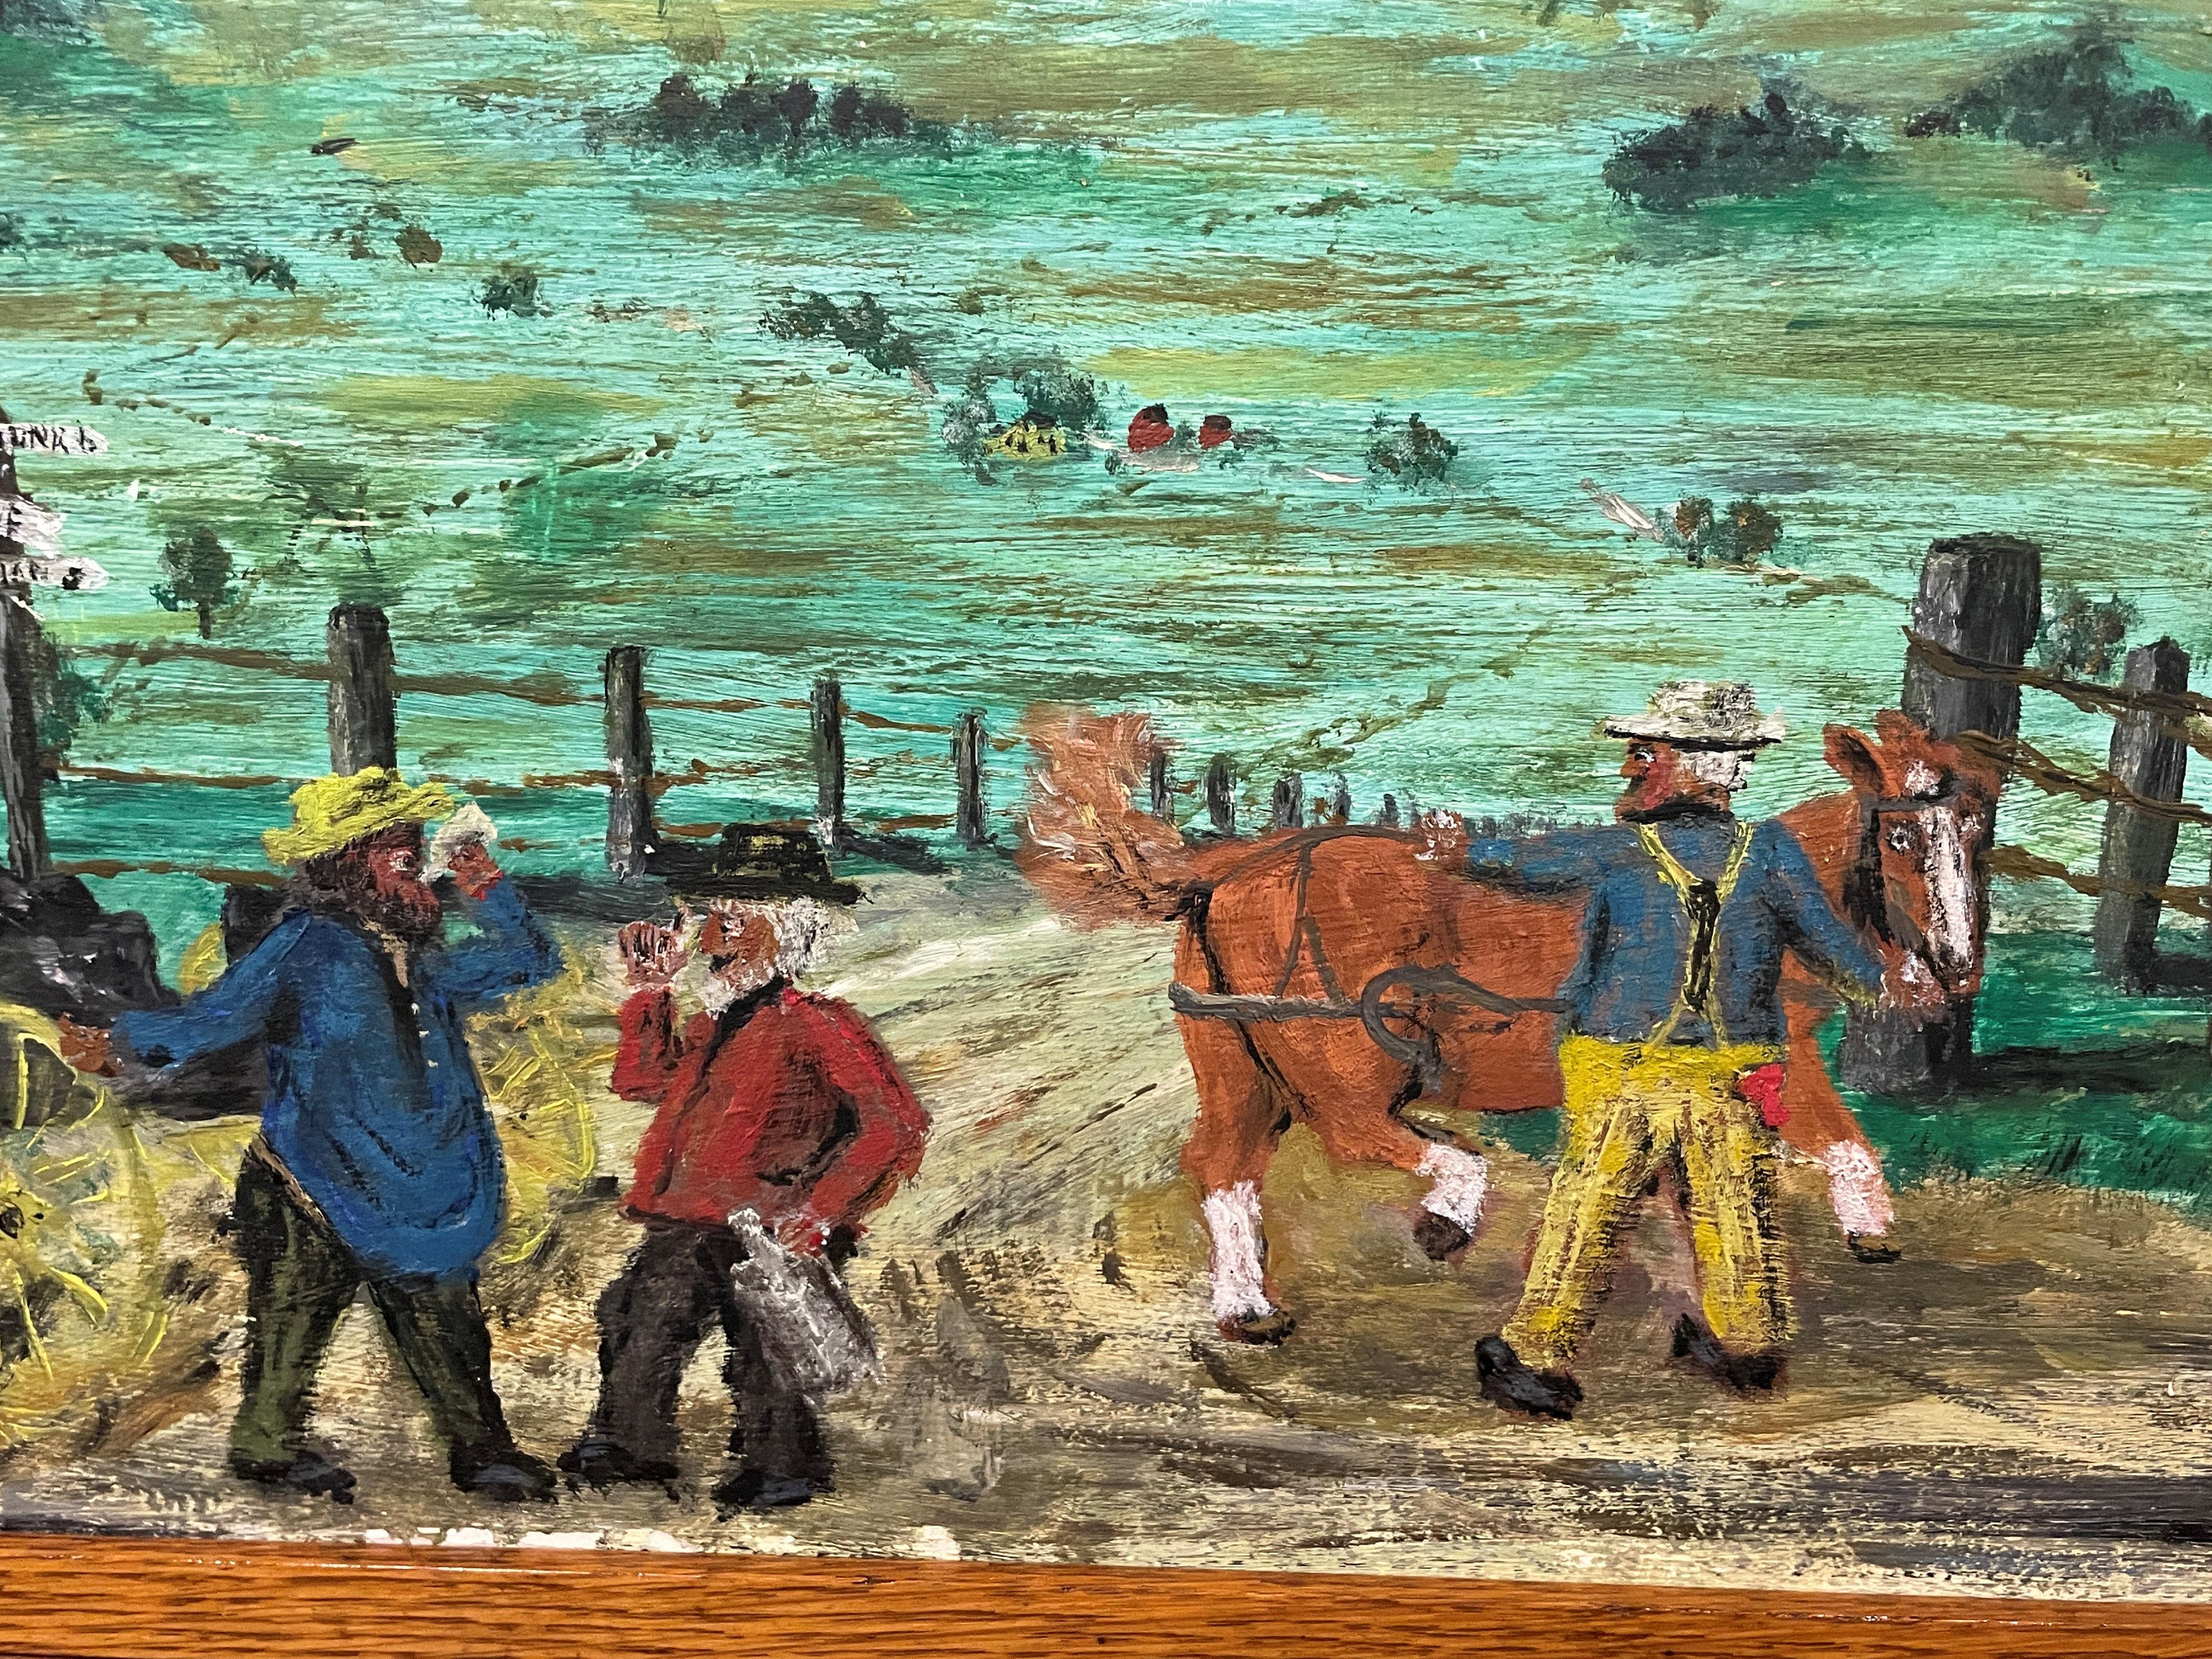 Fred E. Robertson (1878 - 1953)
Swapping Horses, 1947
Signed and dated lower right
Oil on masonite
12 5/8 x 24 inches

Fred Robertson, like his more famous older sister, Anna Mary Robertson (Grandma) Moses, was born on a farm northeast of Albany,